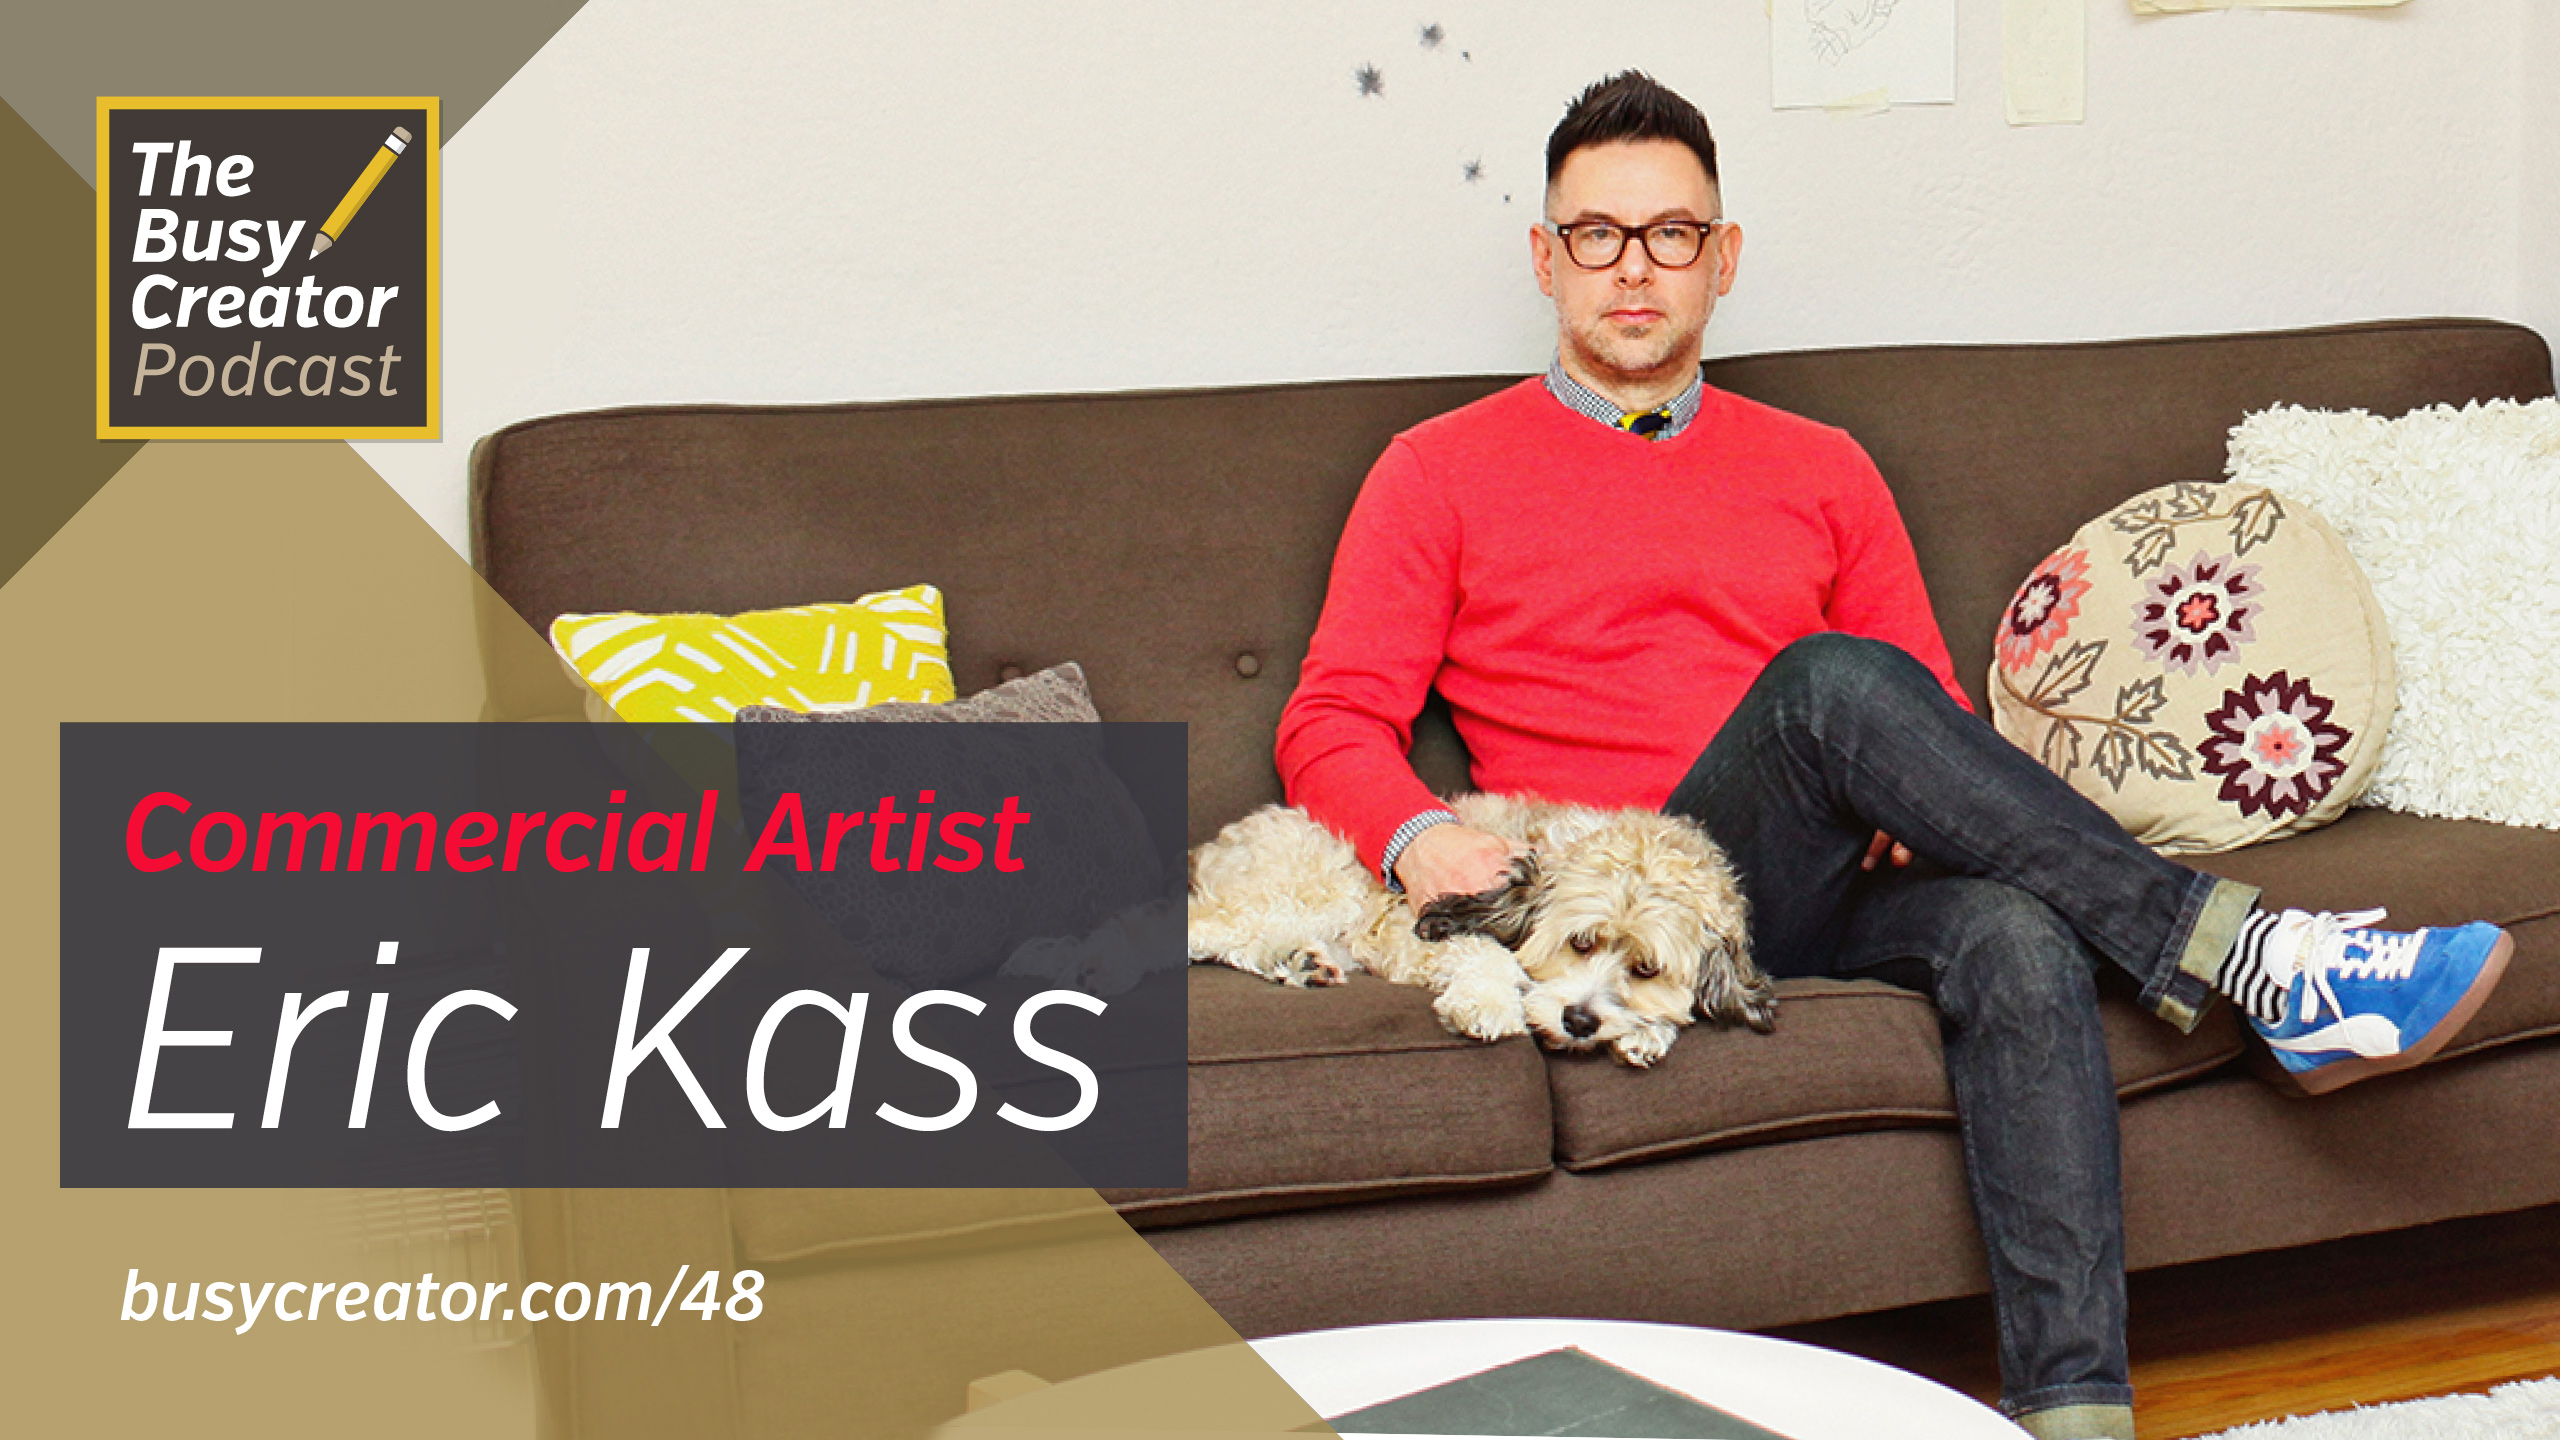 Crafting a Solo Design Practice and Pulling Cultural References with Commercial Artist Eric Kass